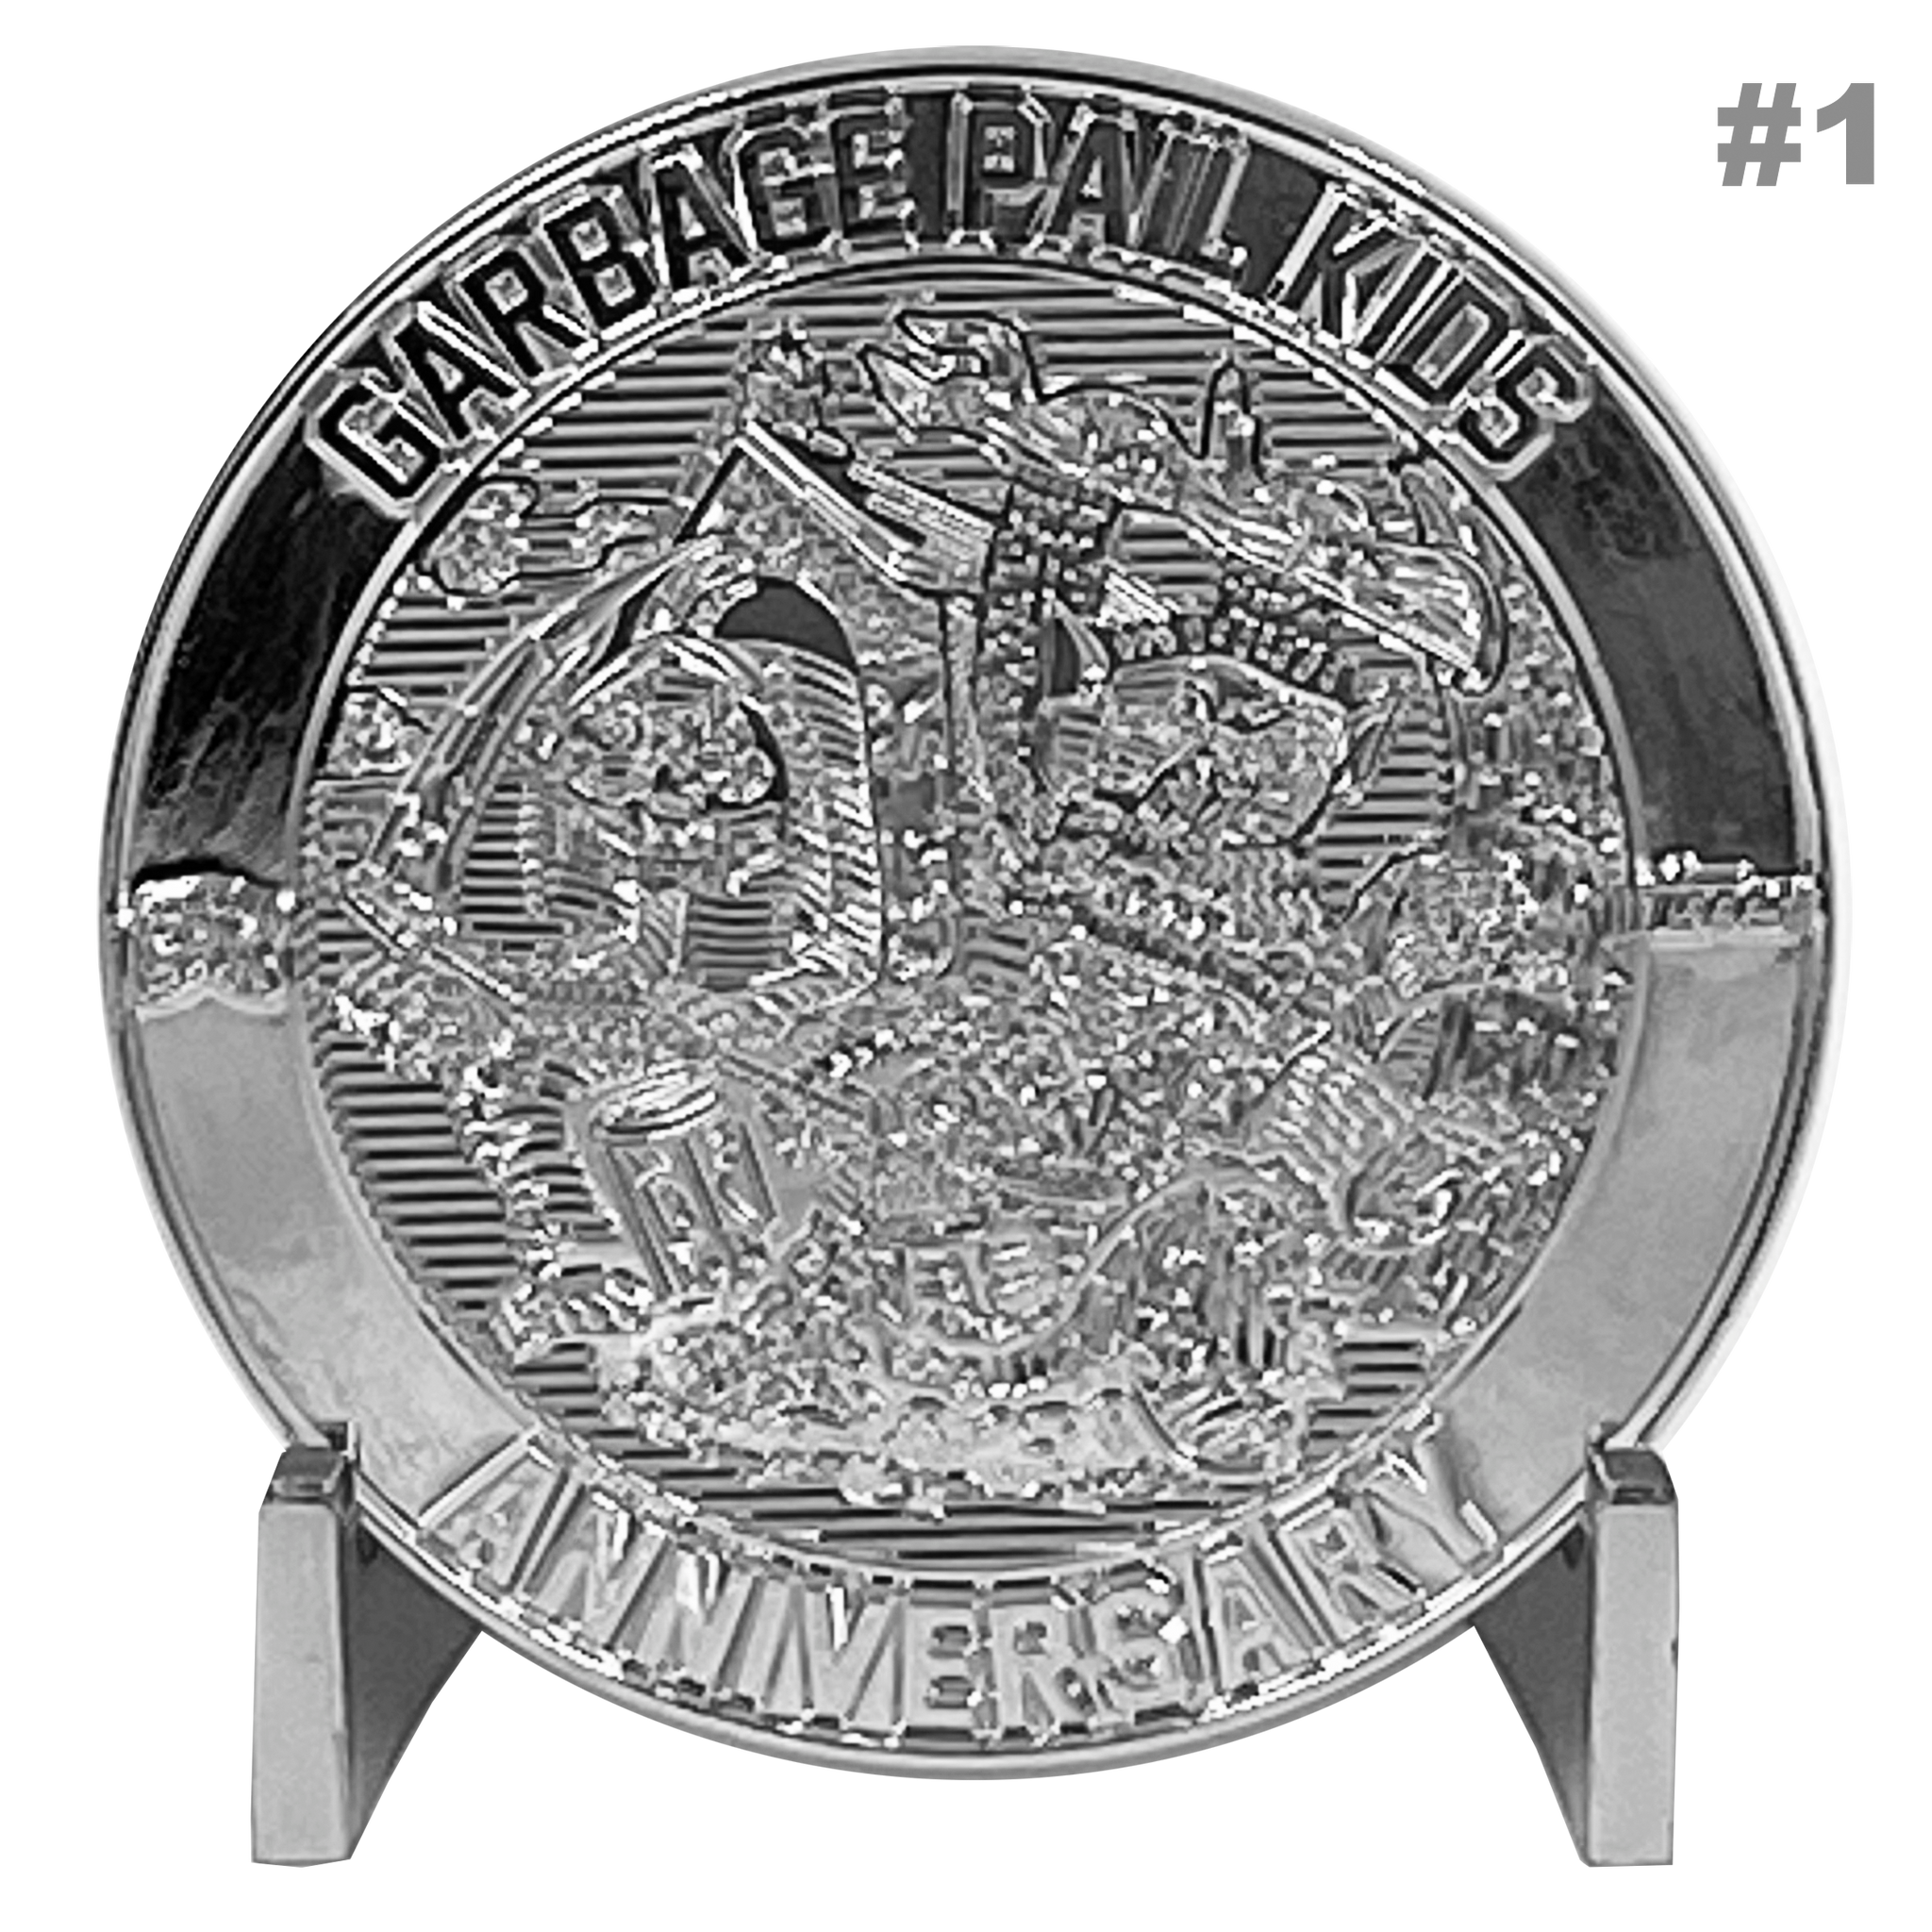 Coin 001 GPK Nation Genuine Sterling Silver Plated Challenge Coin Garbage Pail Kids